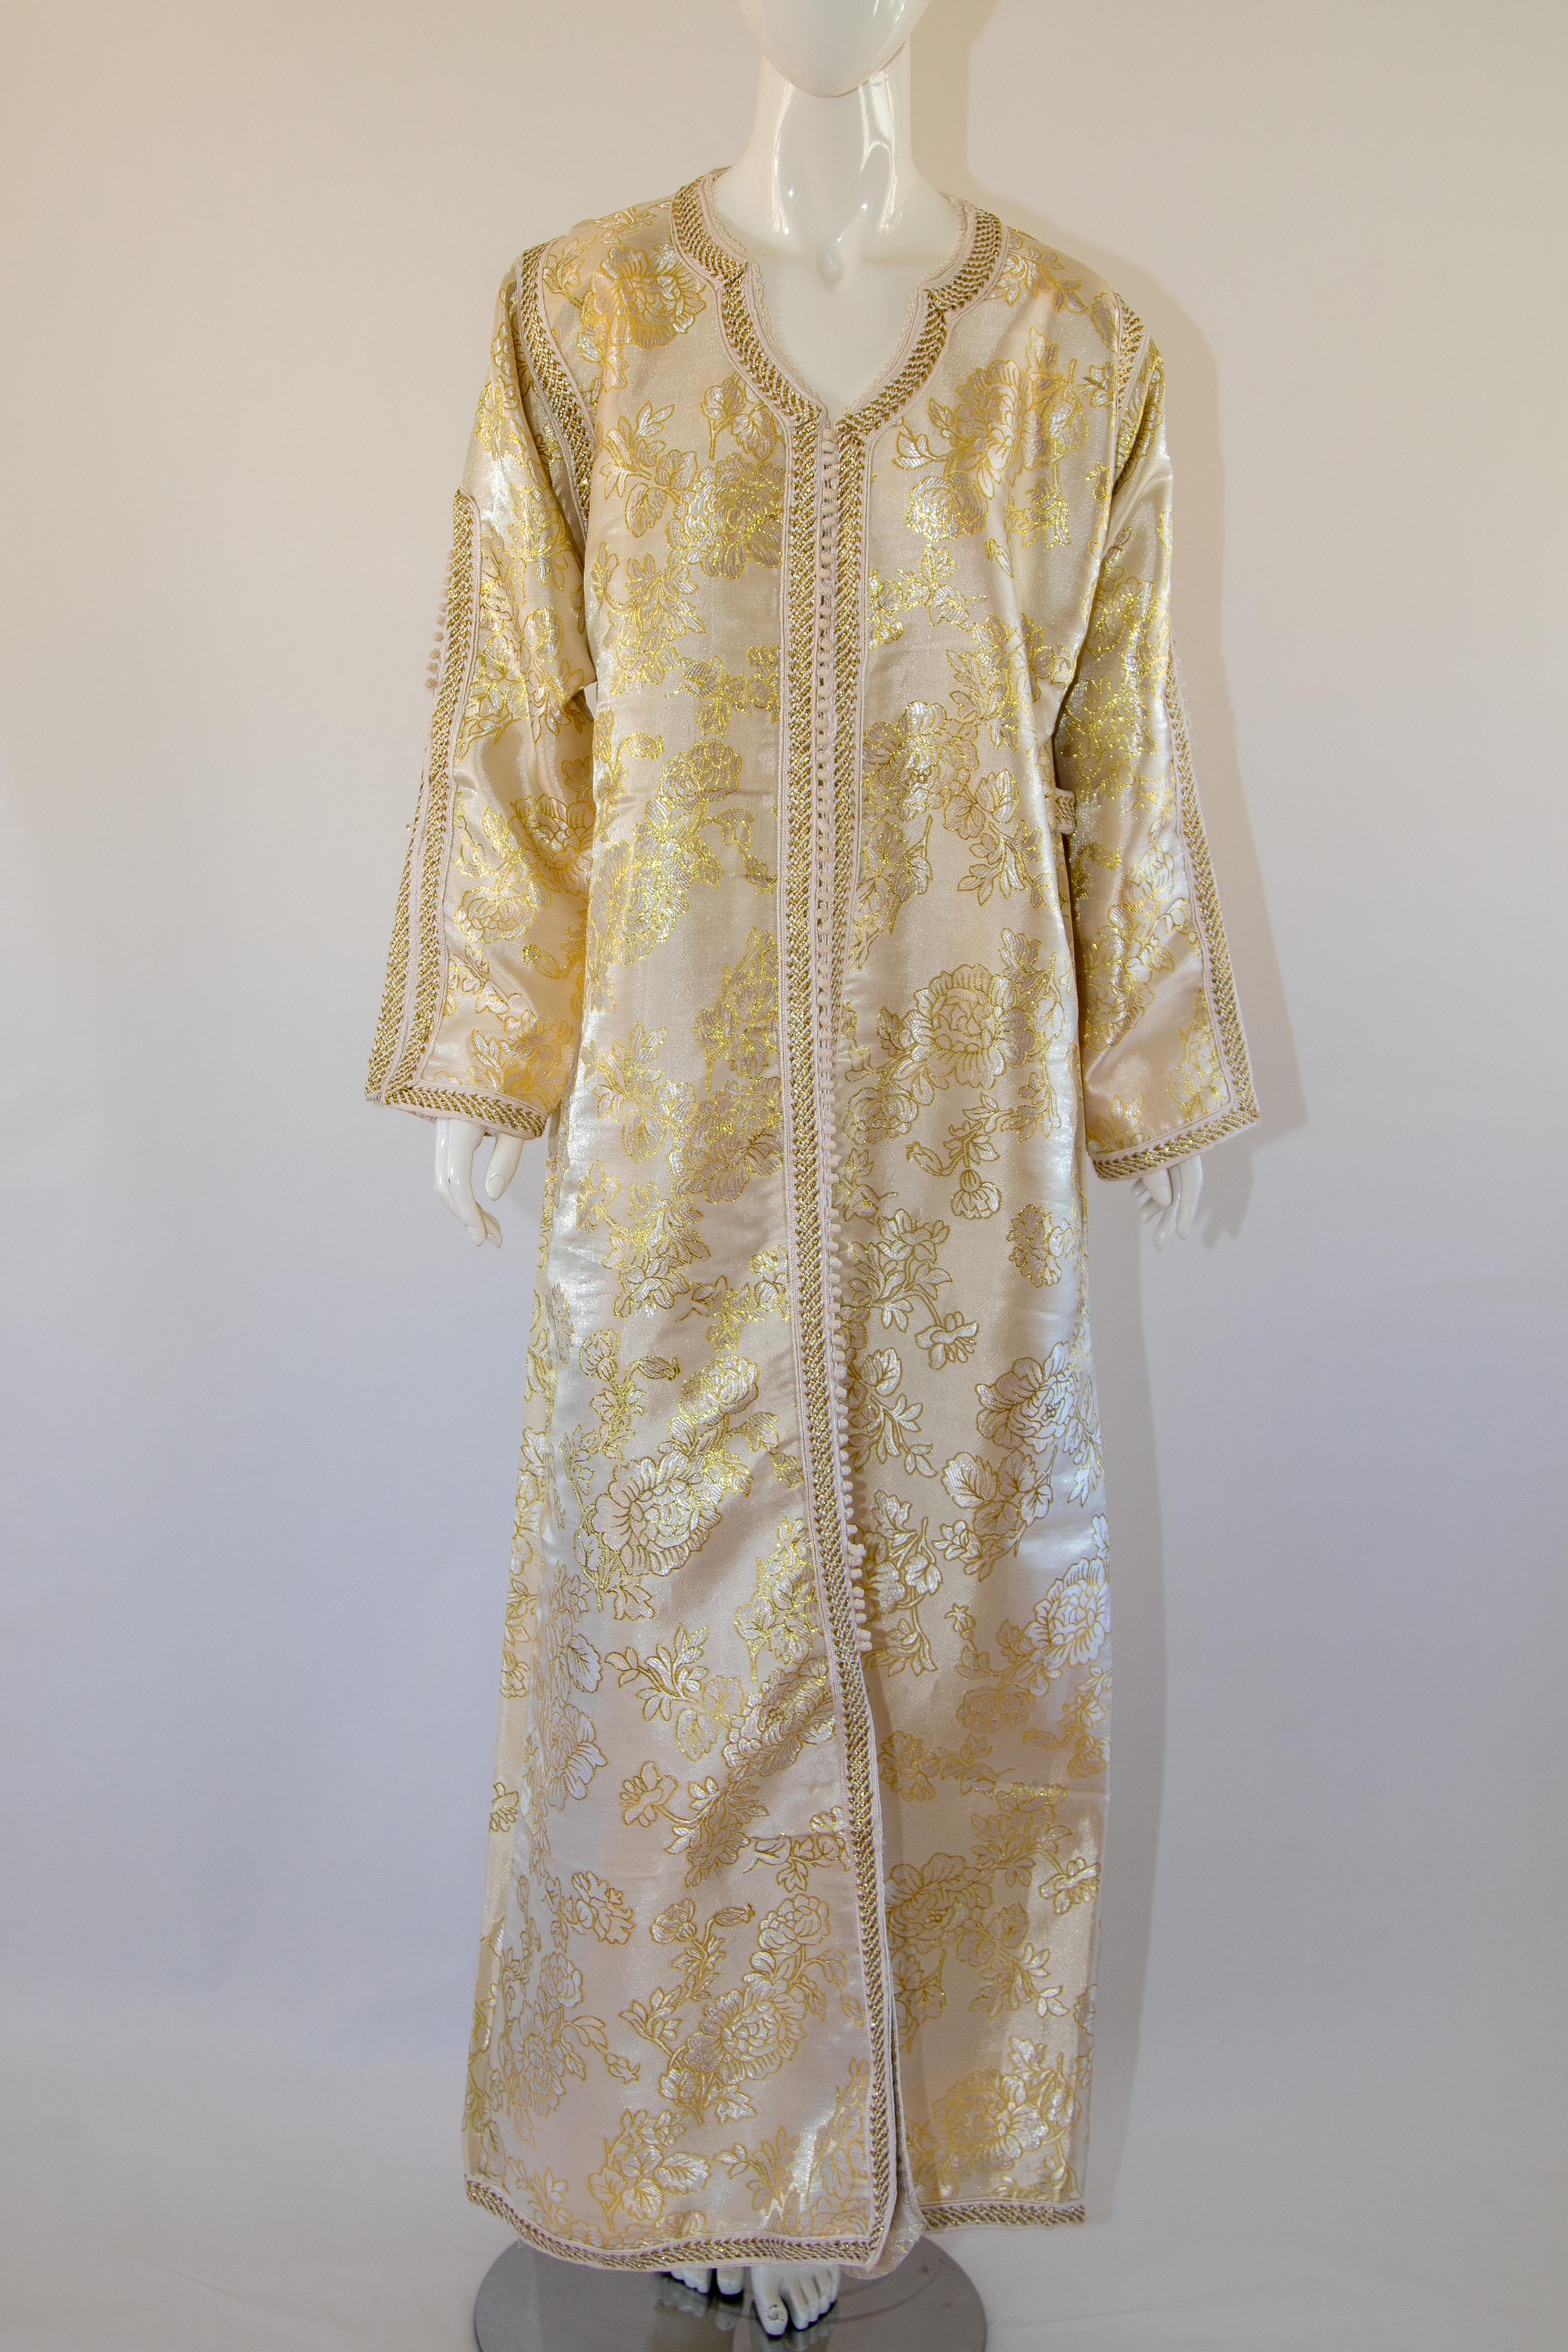 Moroccan vintage exotic metallic white gold brocade caftan gown, circa 1970s.
The luxurious Moorish kaftan is designed with white and gold metallic brocade.
The front of the elegant caftan gown is embellished at the front with woven gold buttons and